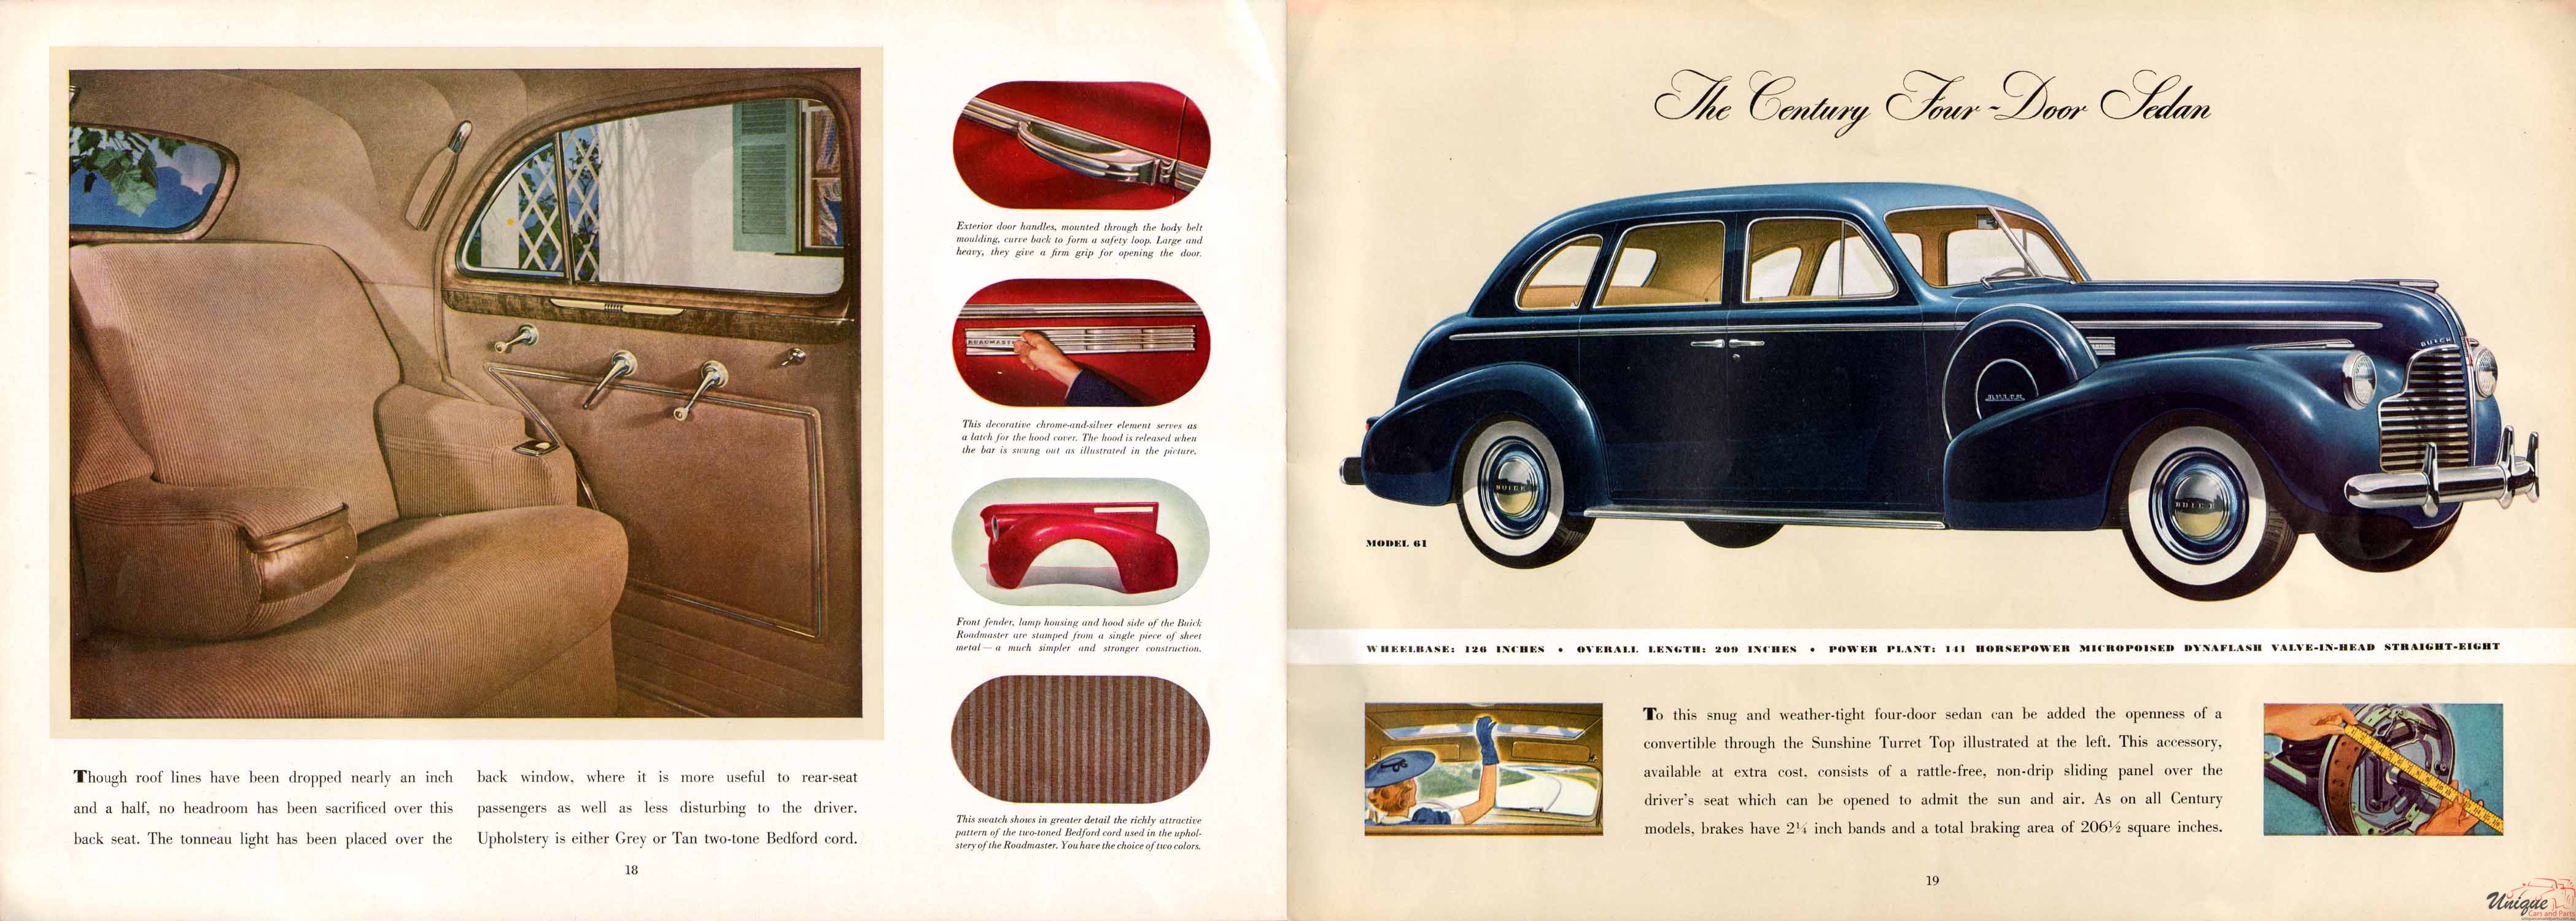 1940 Buick Brochure Page 4